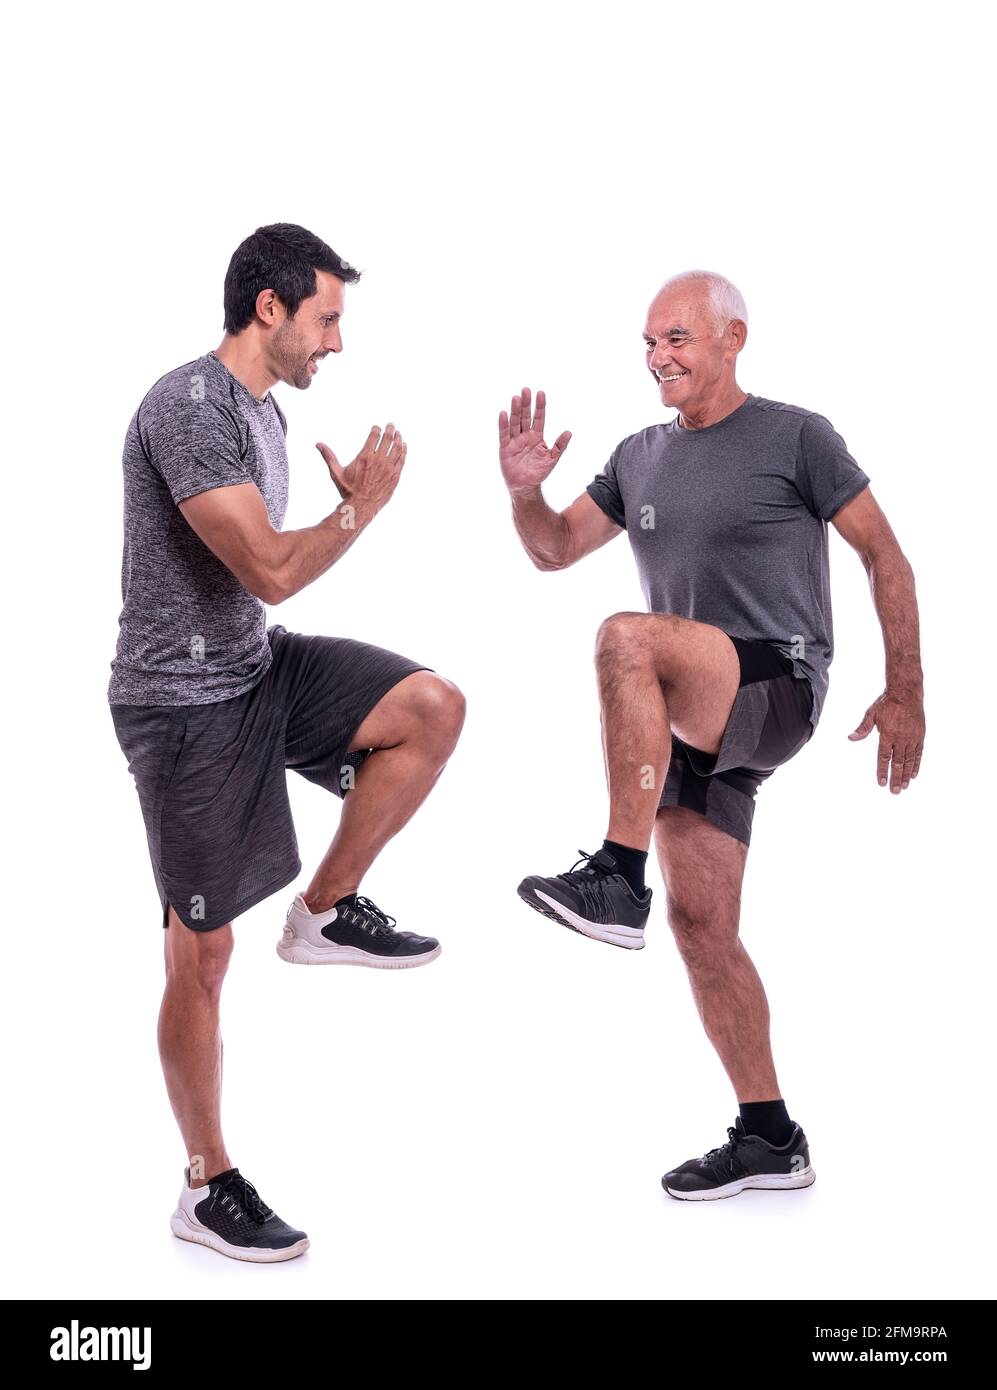 Elderly male client exercising with a fitness trainer, exercise walking in place, steps. On a white isolated background. Stock Photo